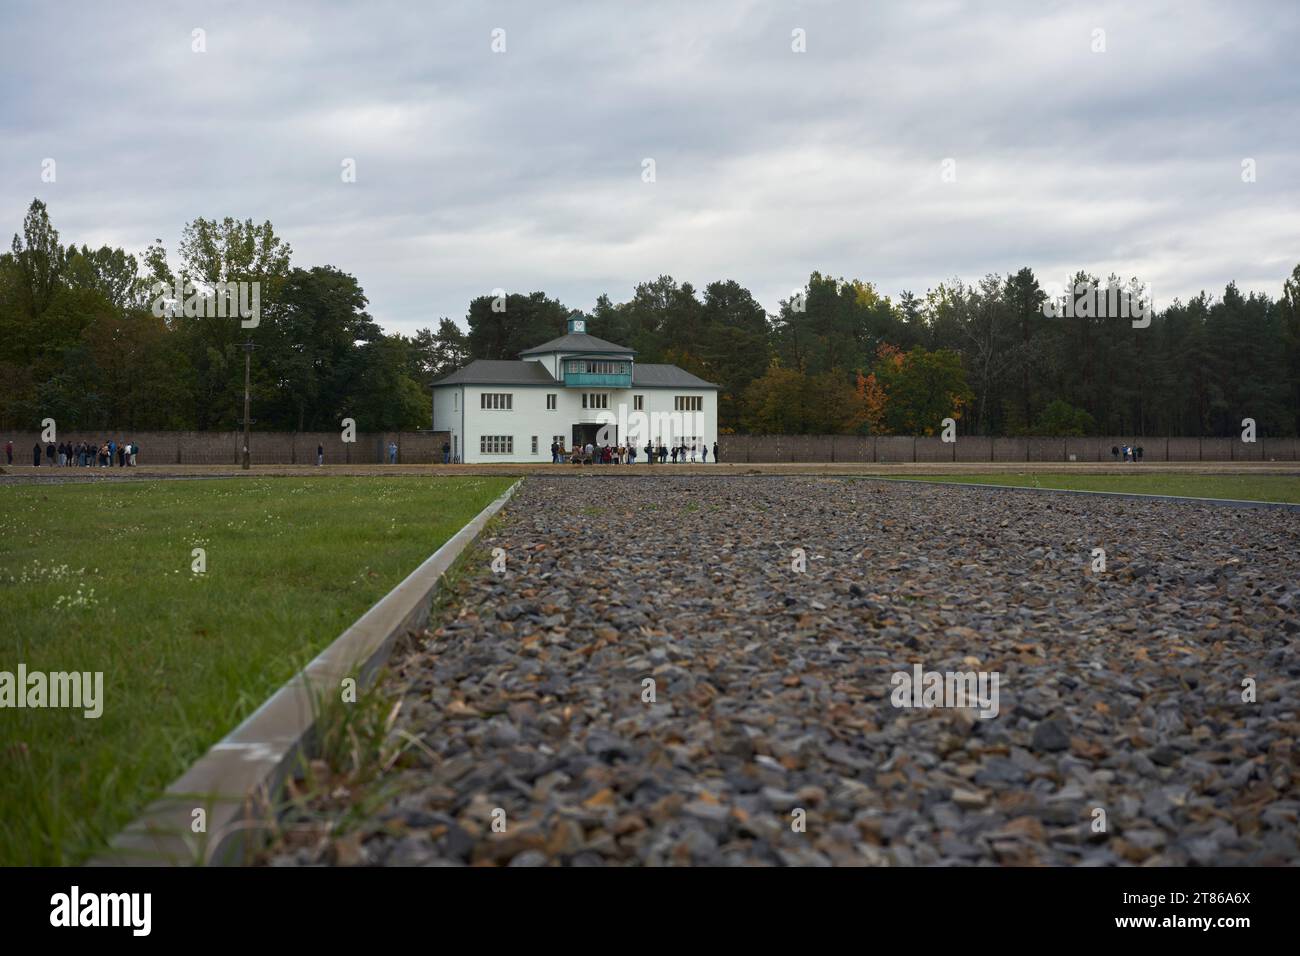 Site of former Sachsenhausen concentration camp. Stock Photo